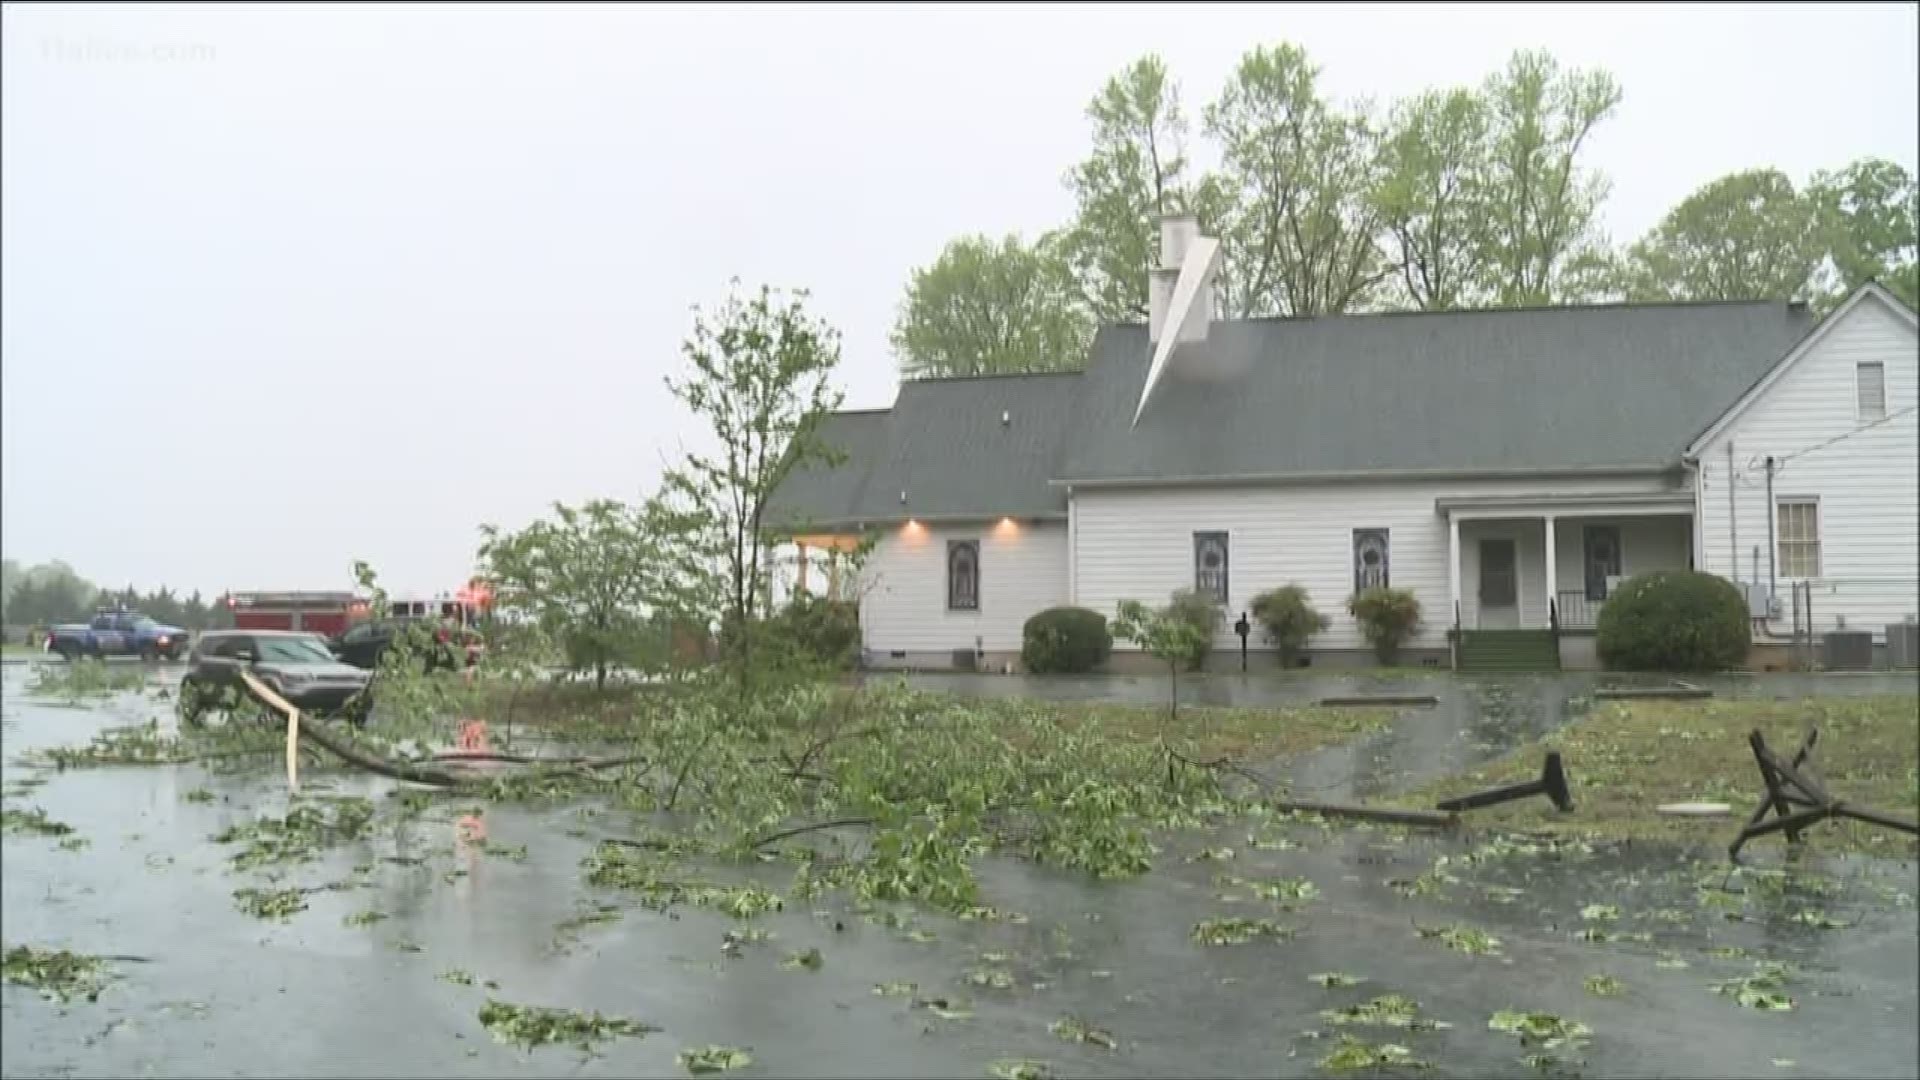 A deacon of the church said that despite tree damage and a toppled steeple, Easter services will continue as planned.